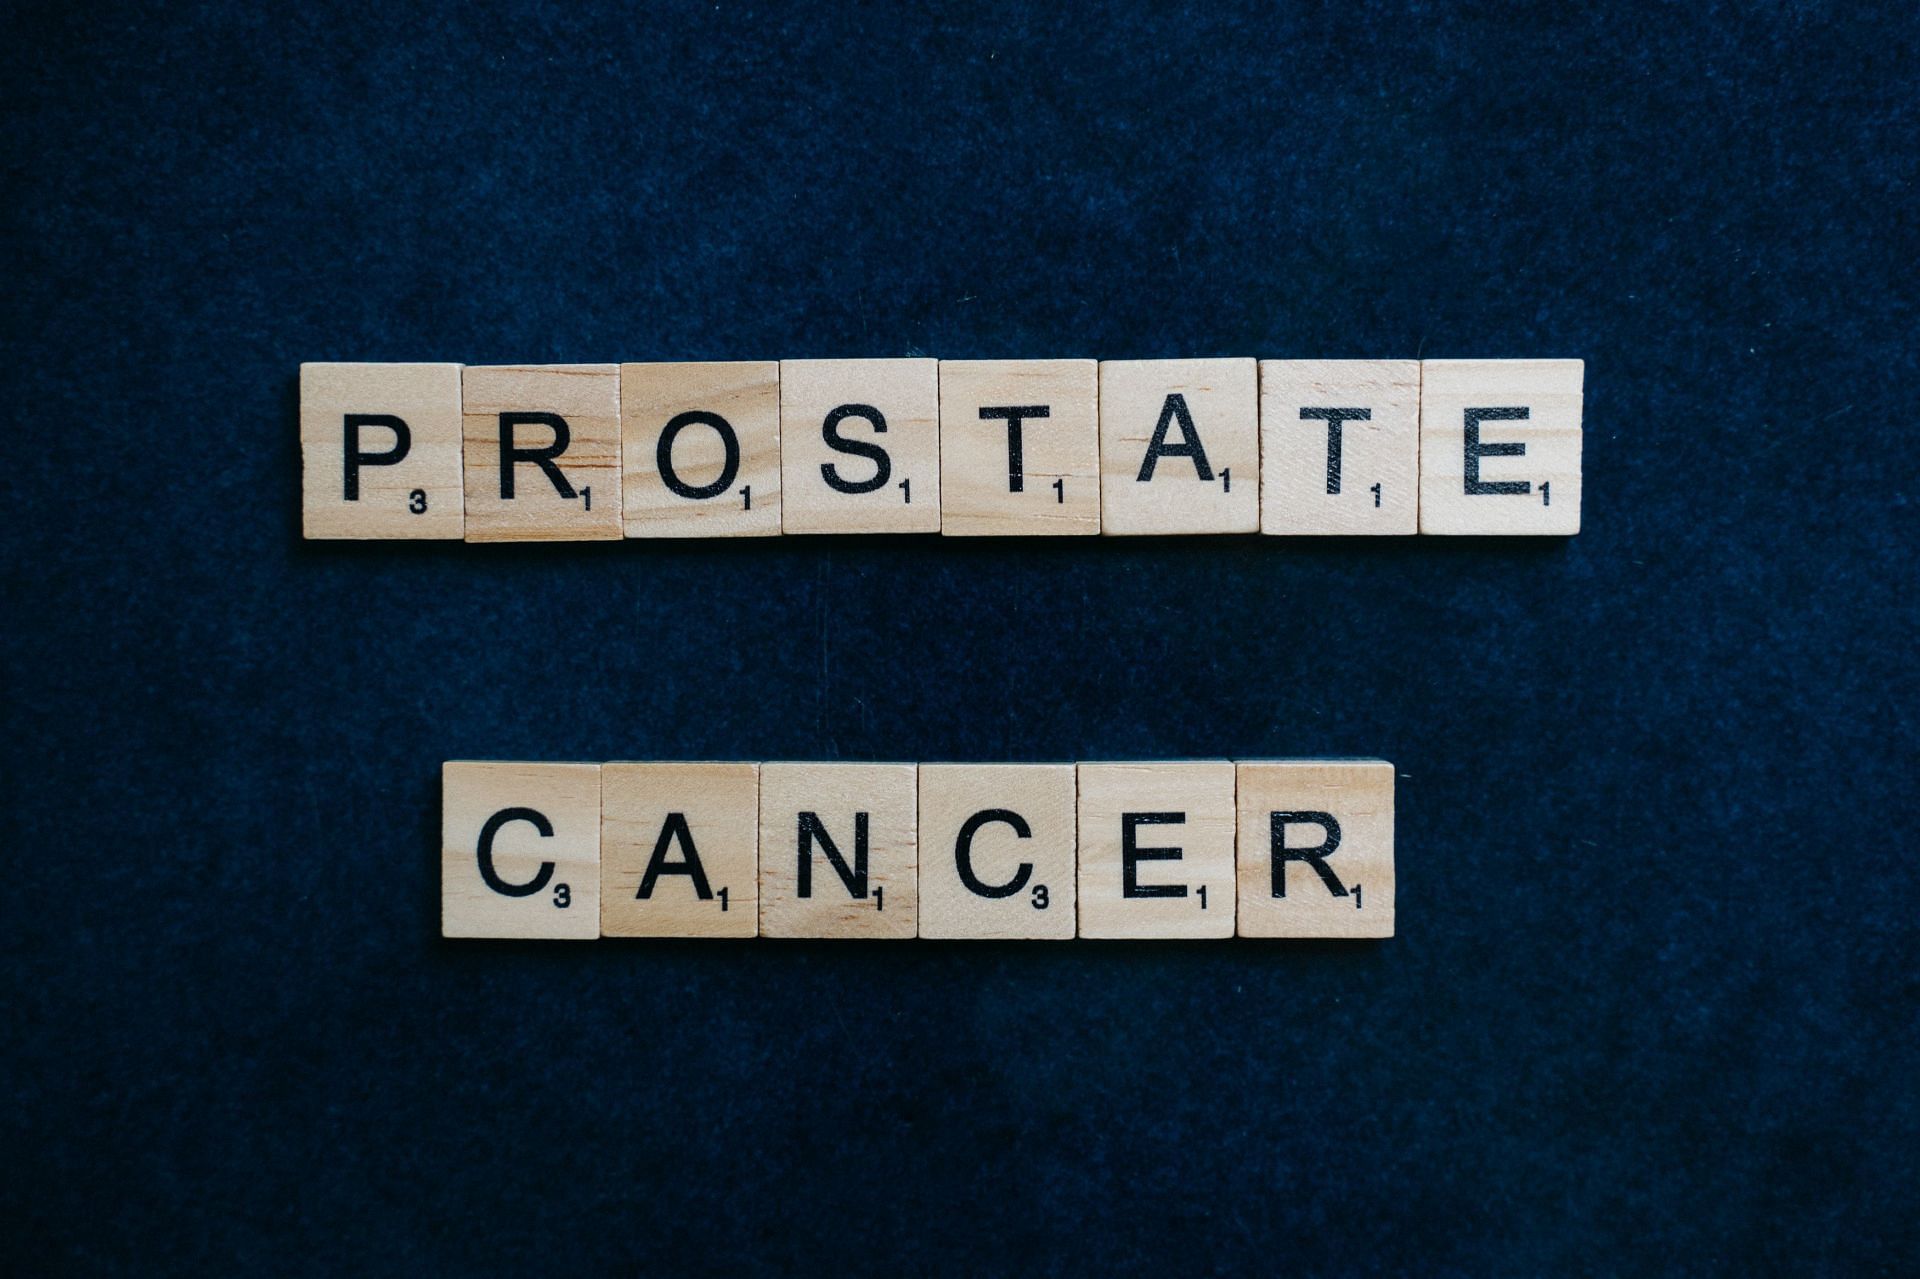 New study finds promising views on prostate cancer treatment. (Image via Pexels/ Anna Tarazevich)